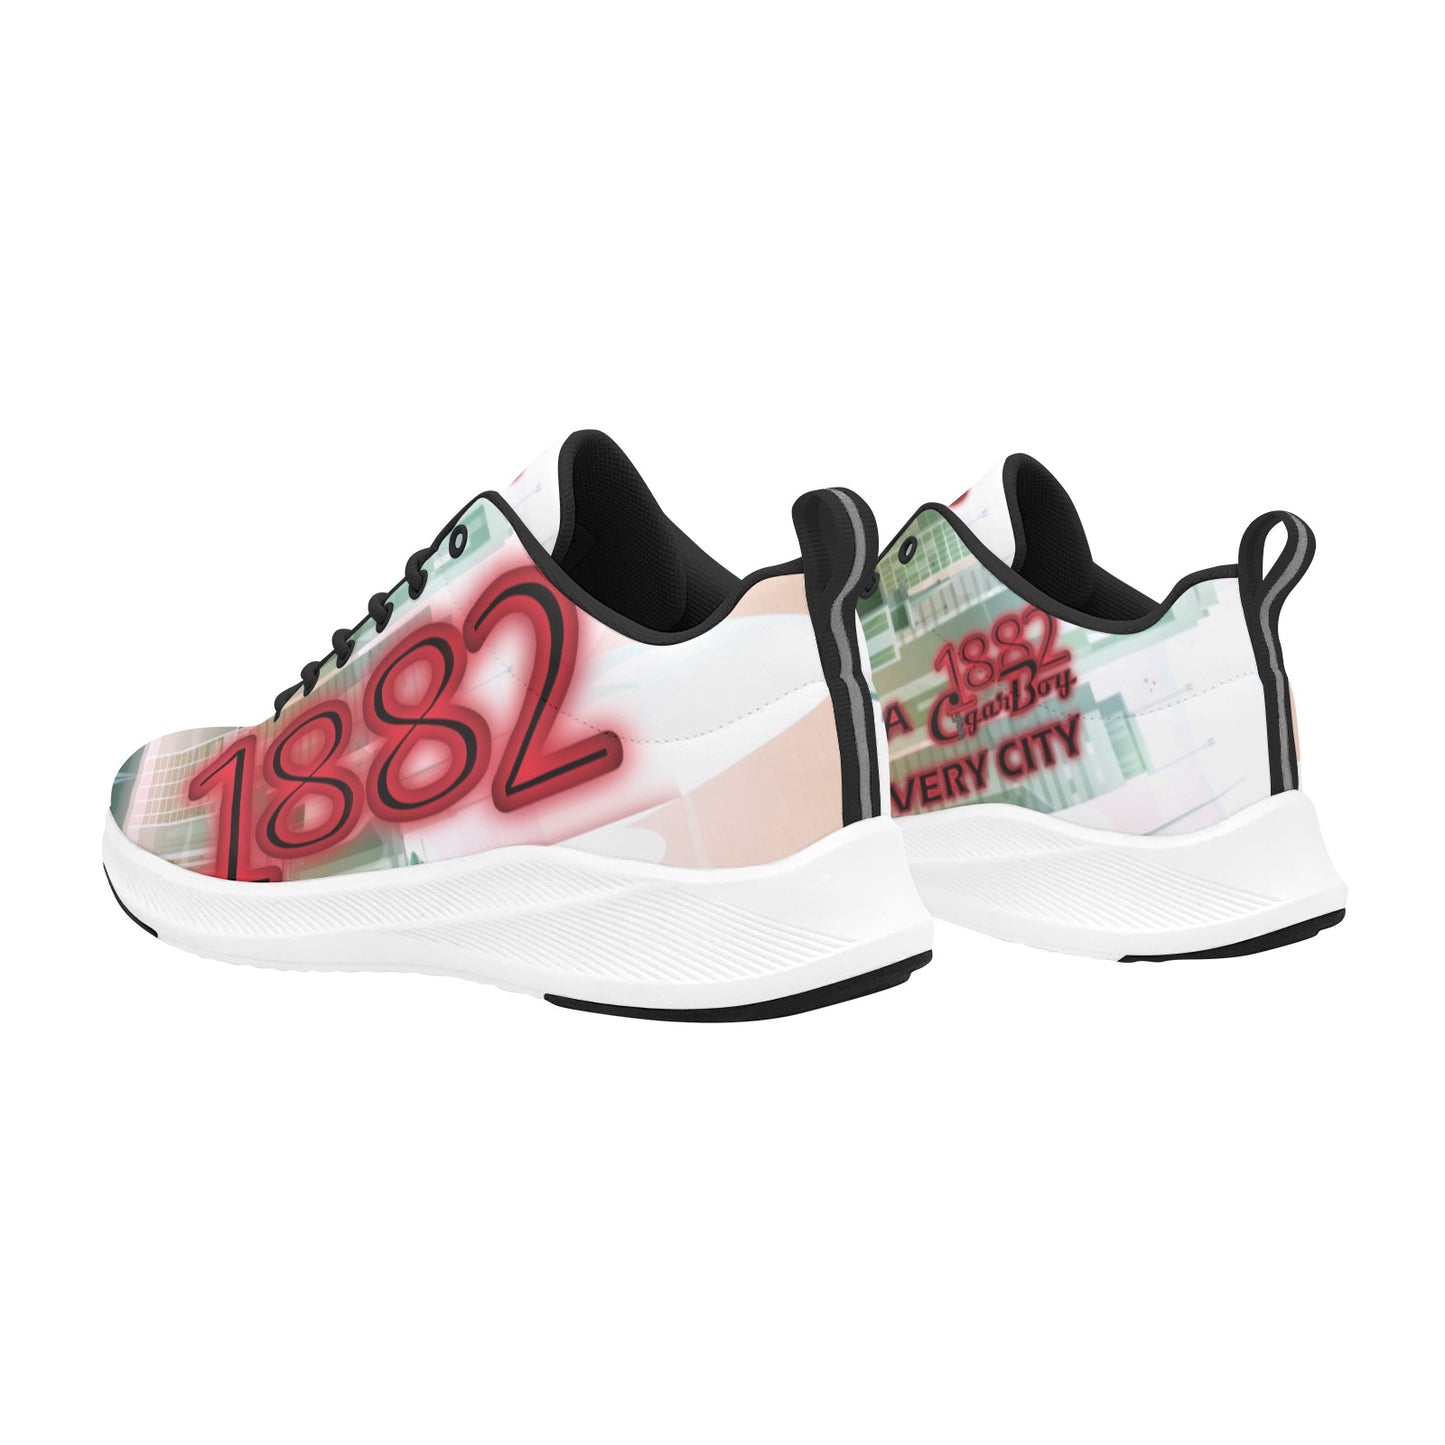 1882 CBZ CITY RUNNERS SHOES